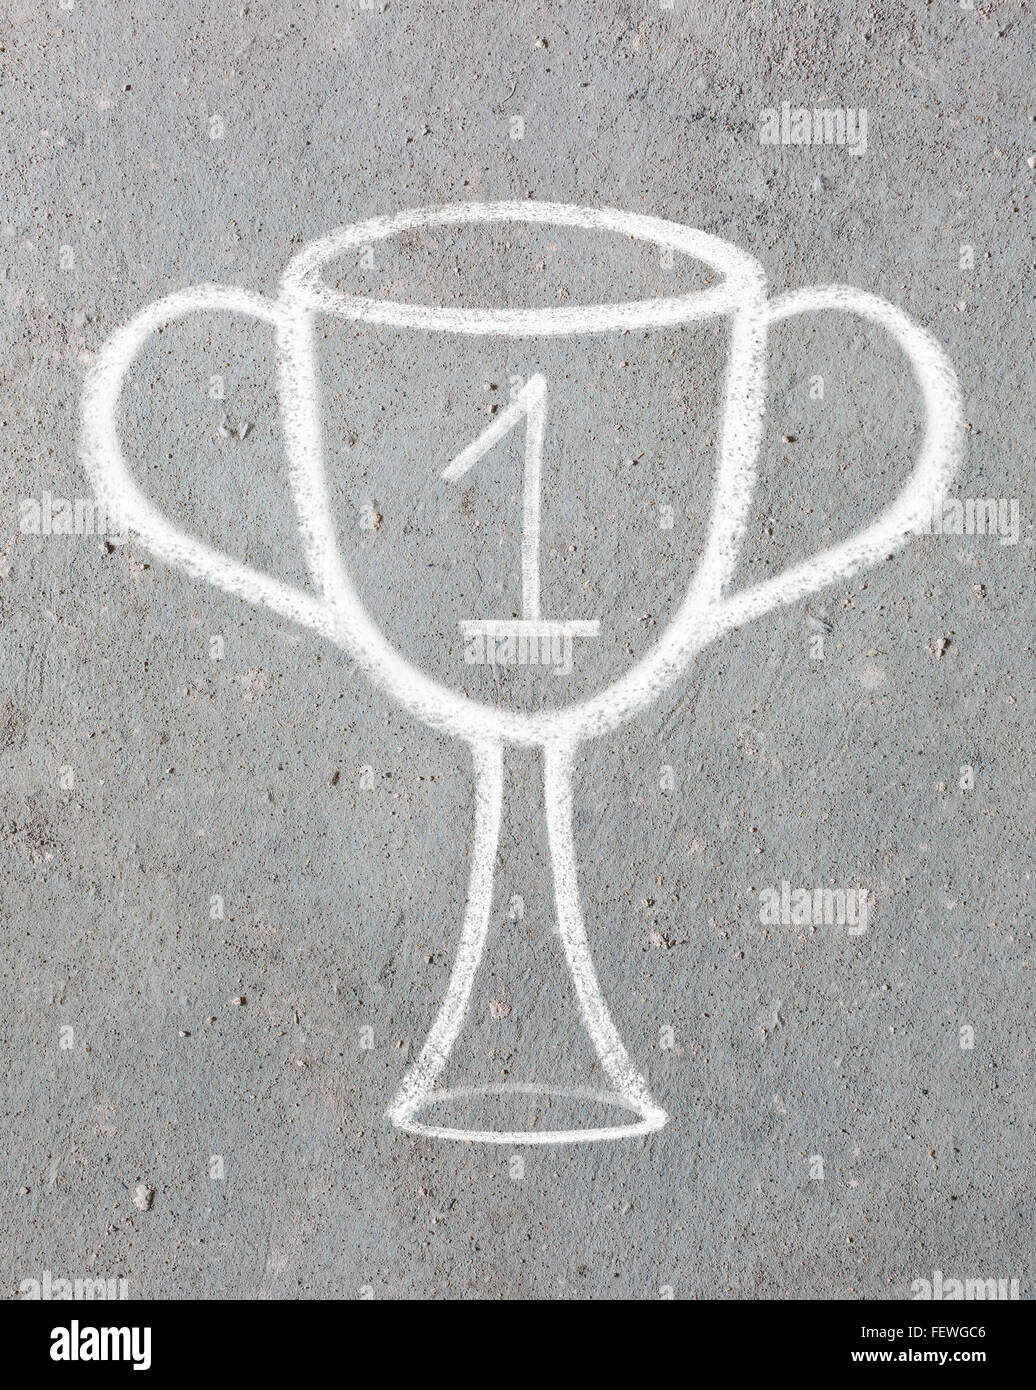 Trophy cup drawn Stock Photo